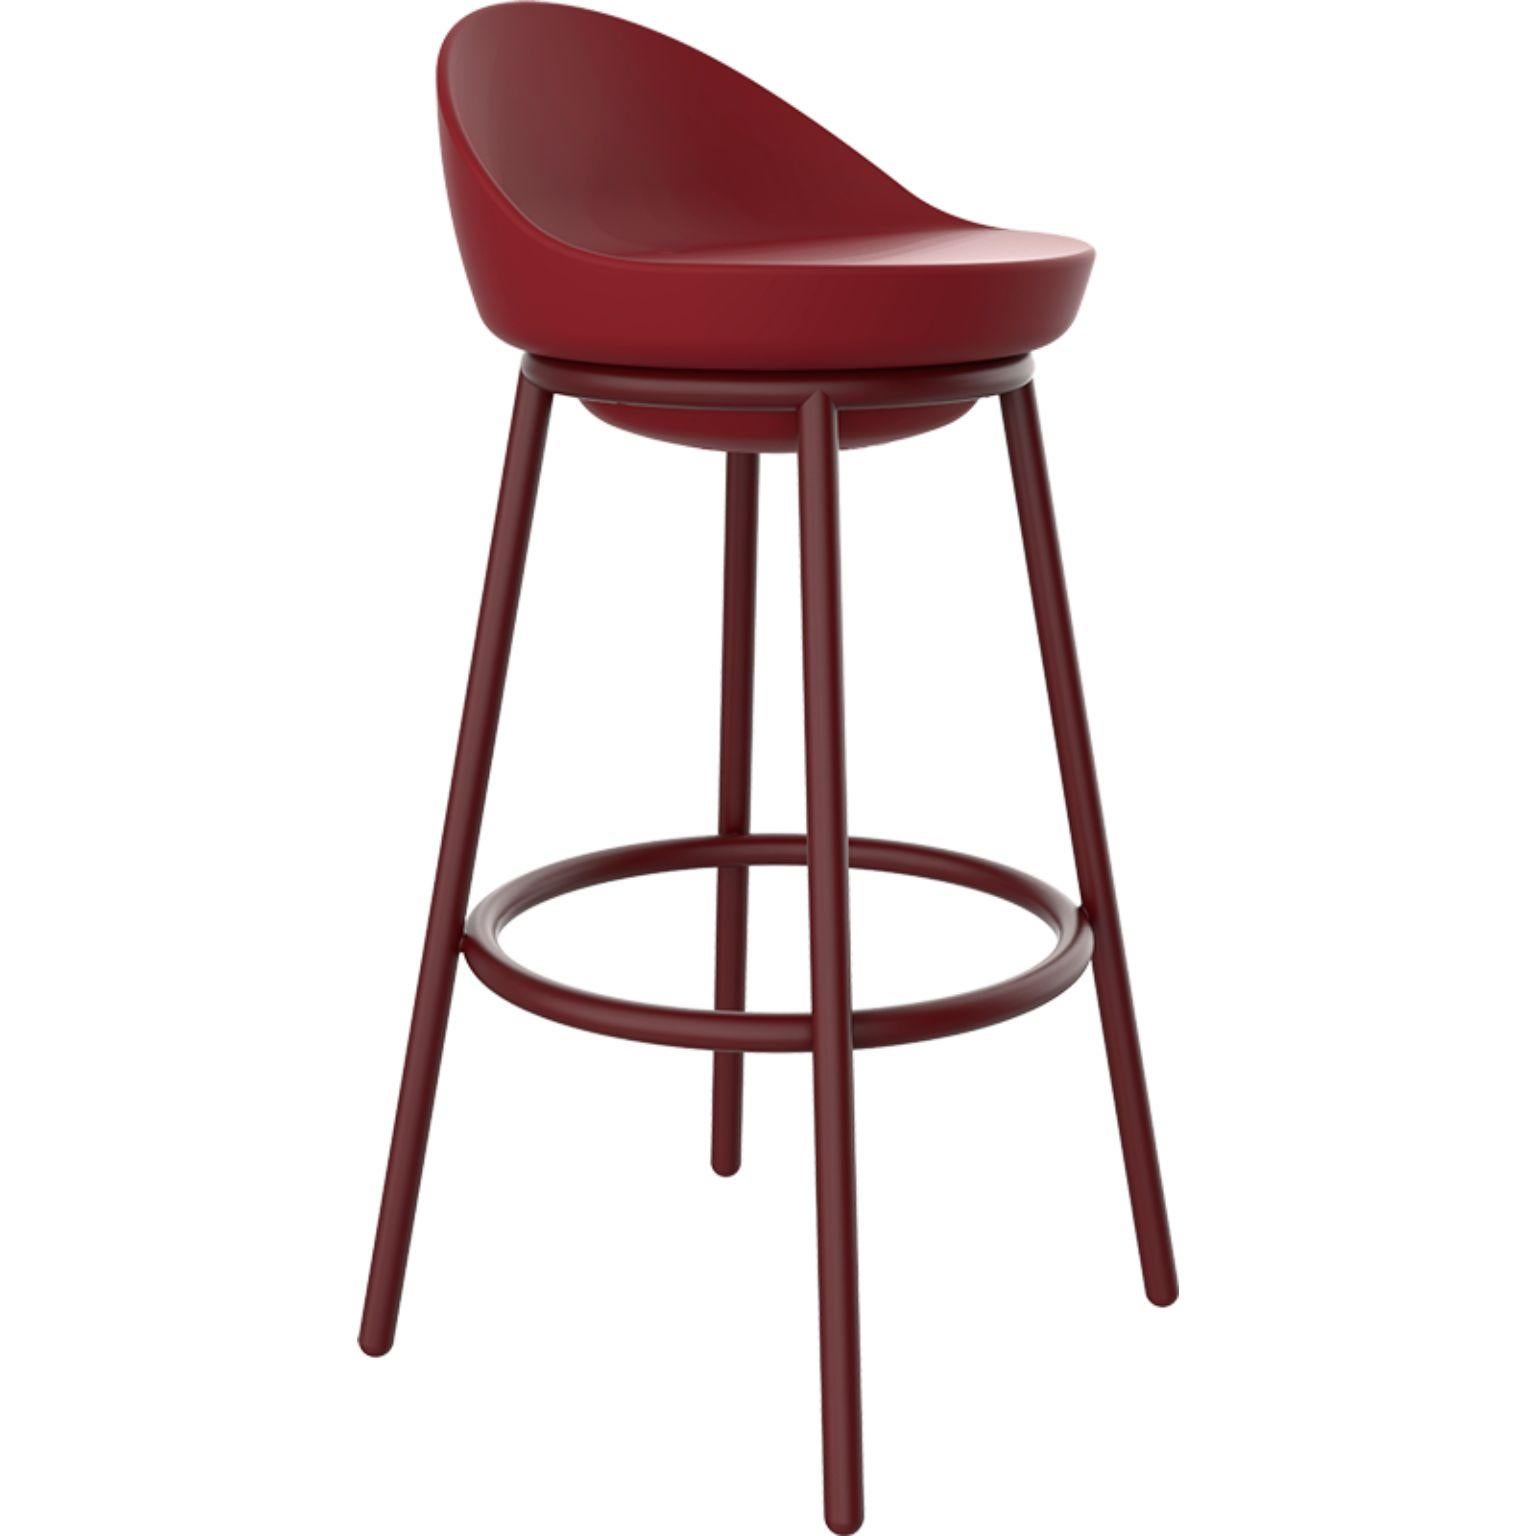 Lace burgundy stool by Mowee.
Dimensions: D43 x H91 cm.
Material: Polyethylene, stainless steel.
Weight: 6.7 kg
Also Available in different colours and finishes. 

Lace is a collection of furniture made by rotomoulding. Its shape resembles a